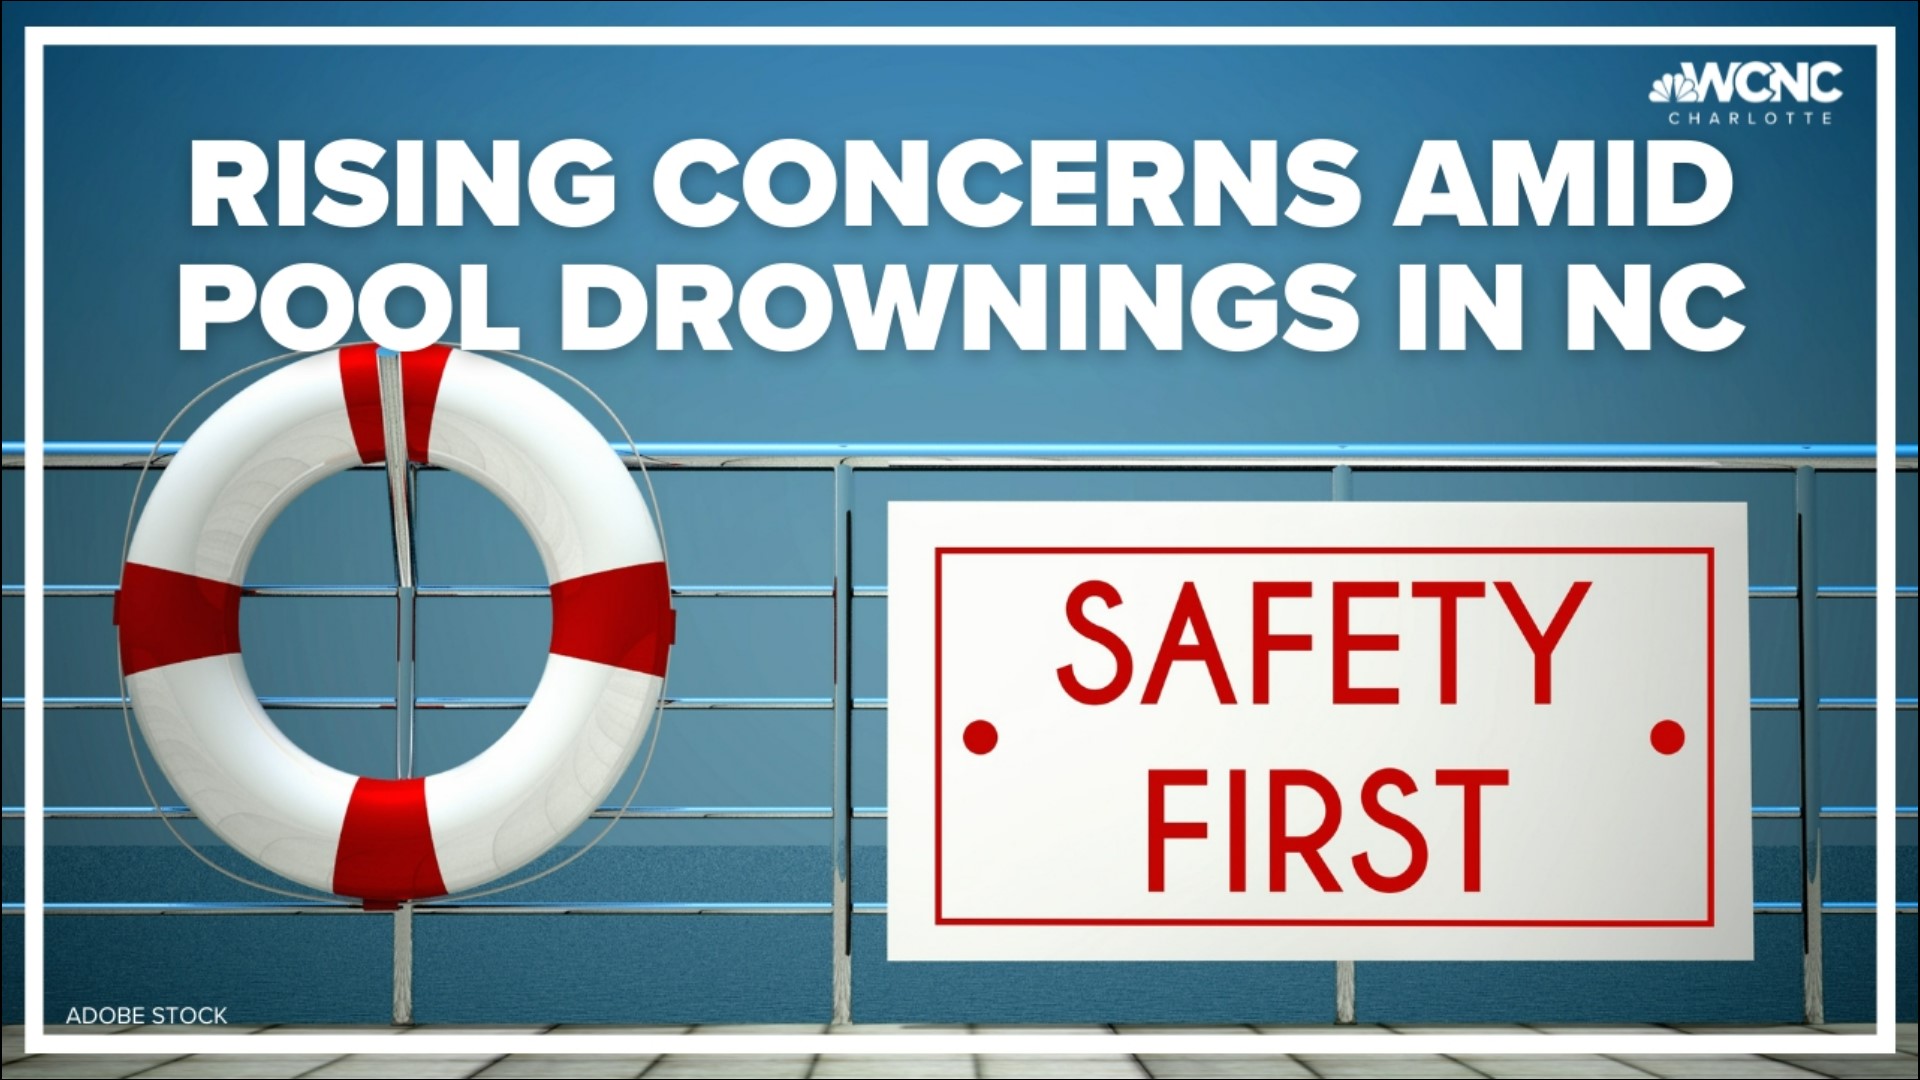 Pool drownings are a top concern this summer for swim instructors.